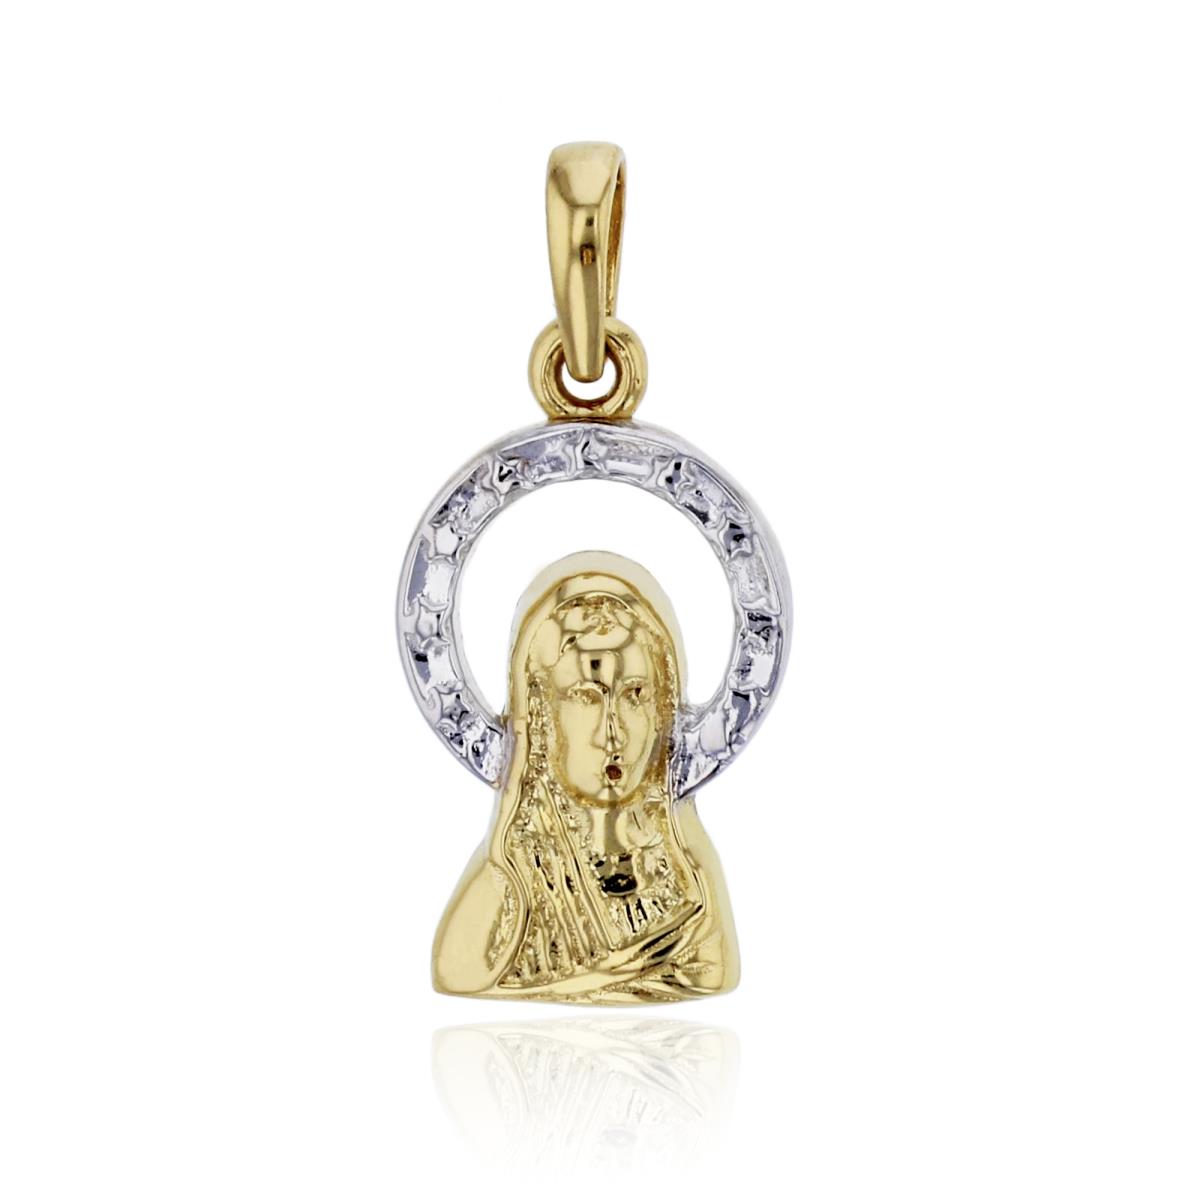 10K Yellow Gold 21x9mm Virgin Mary Rhodium Plated Halo Religious Pendant